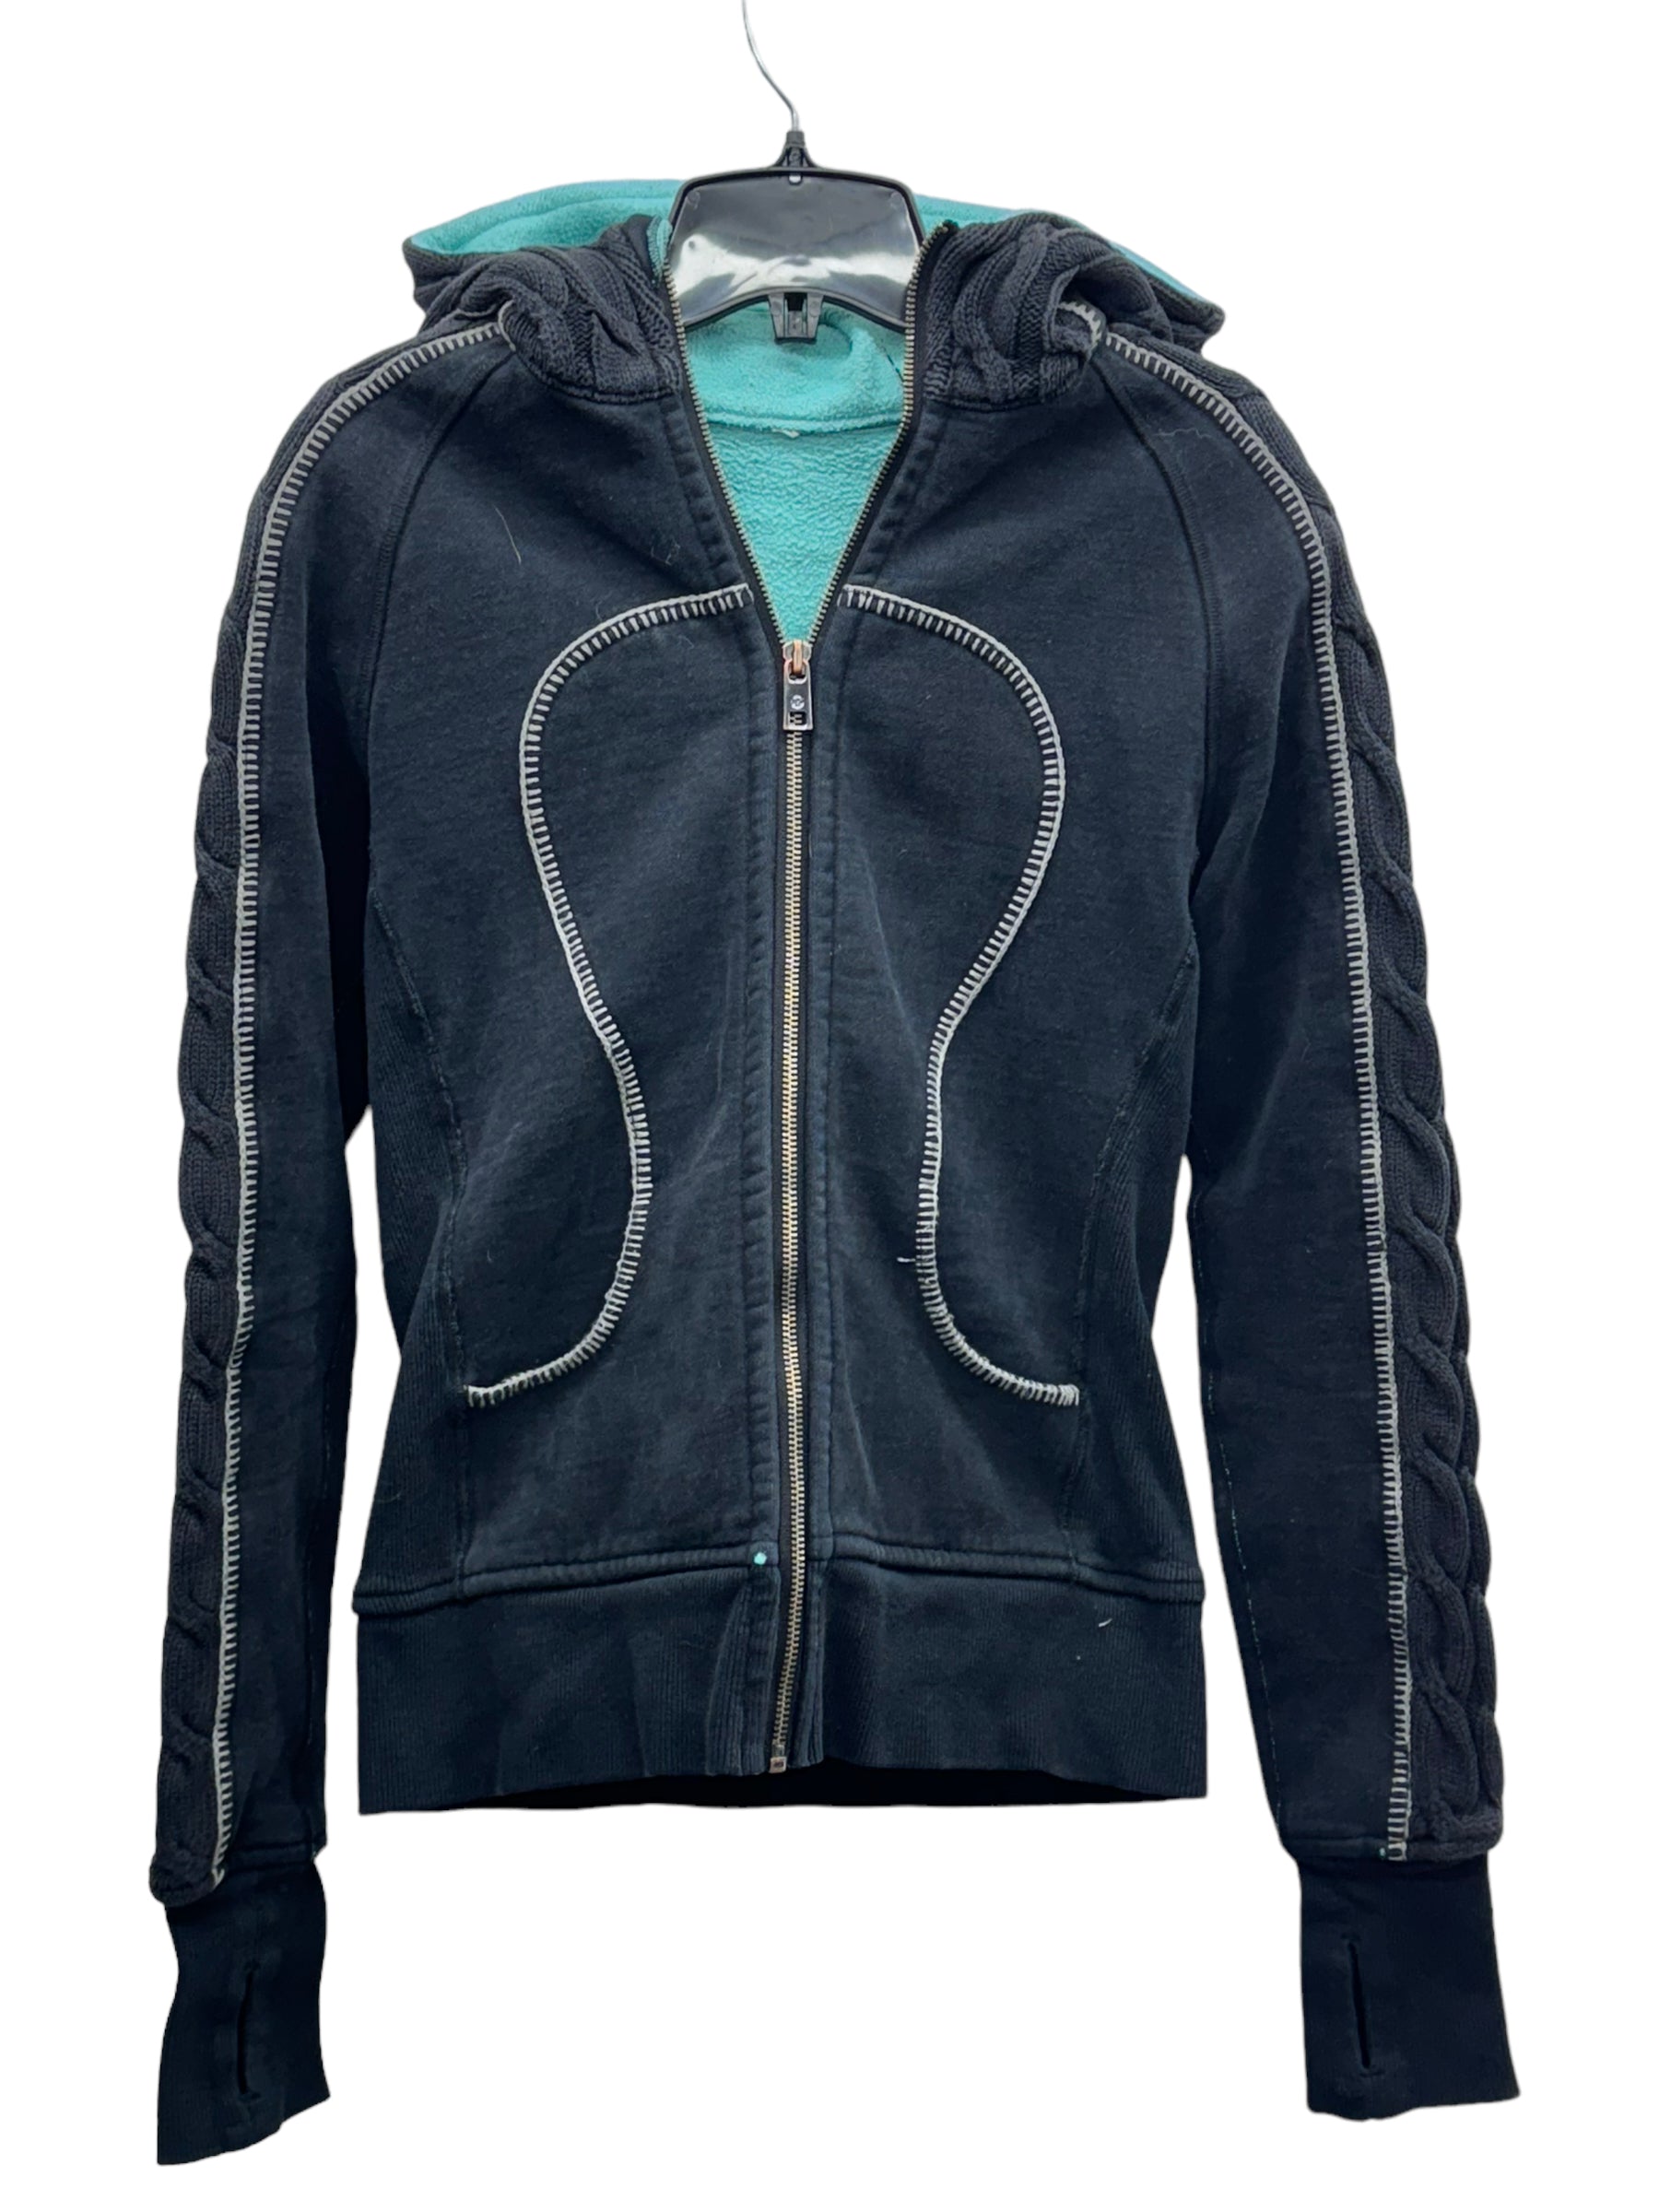 Lululemon Scuba hoodie turquoise and black knitted sleeves - 6